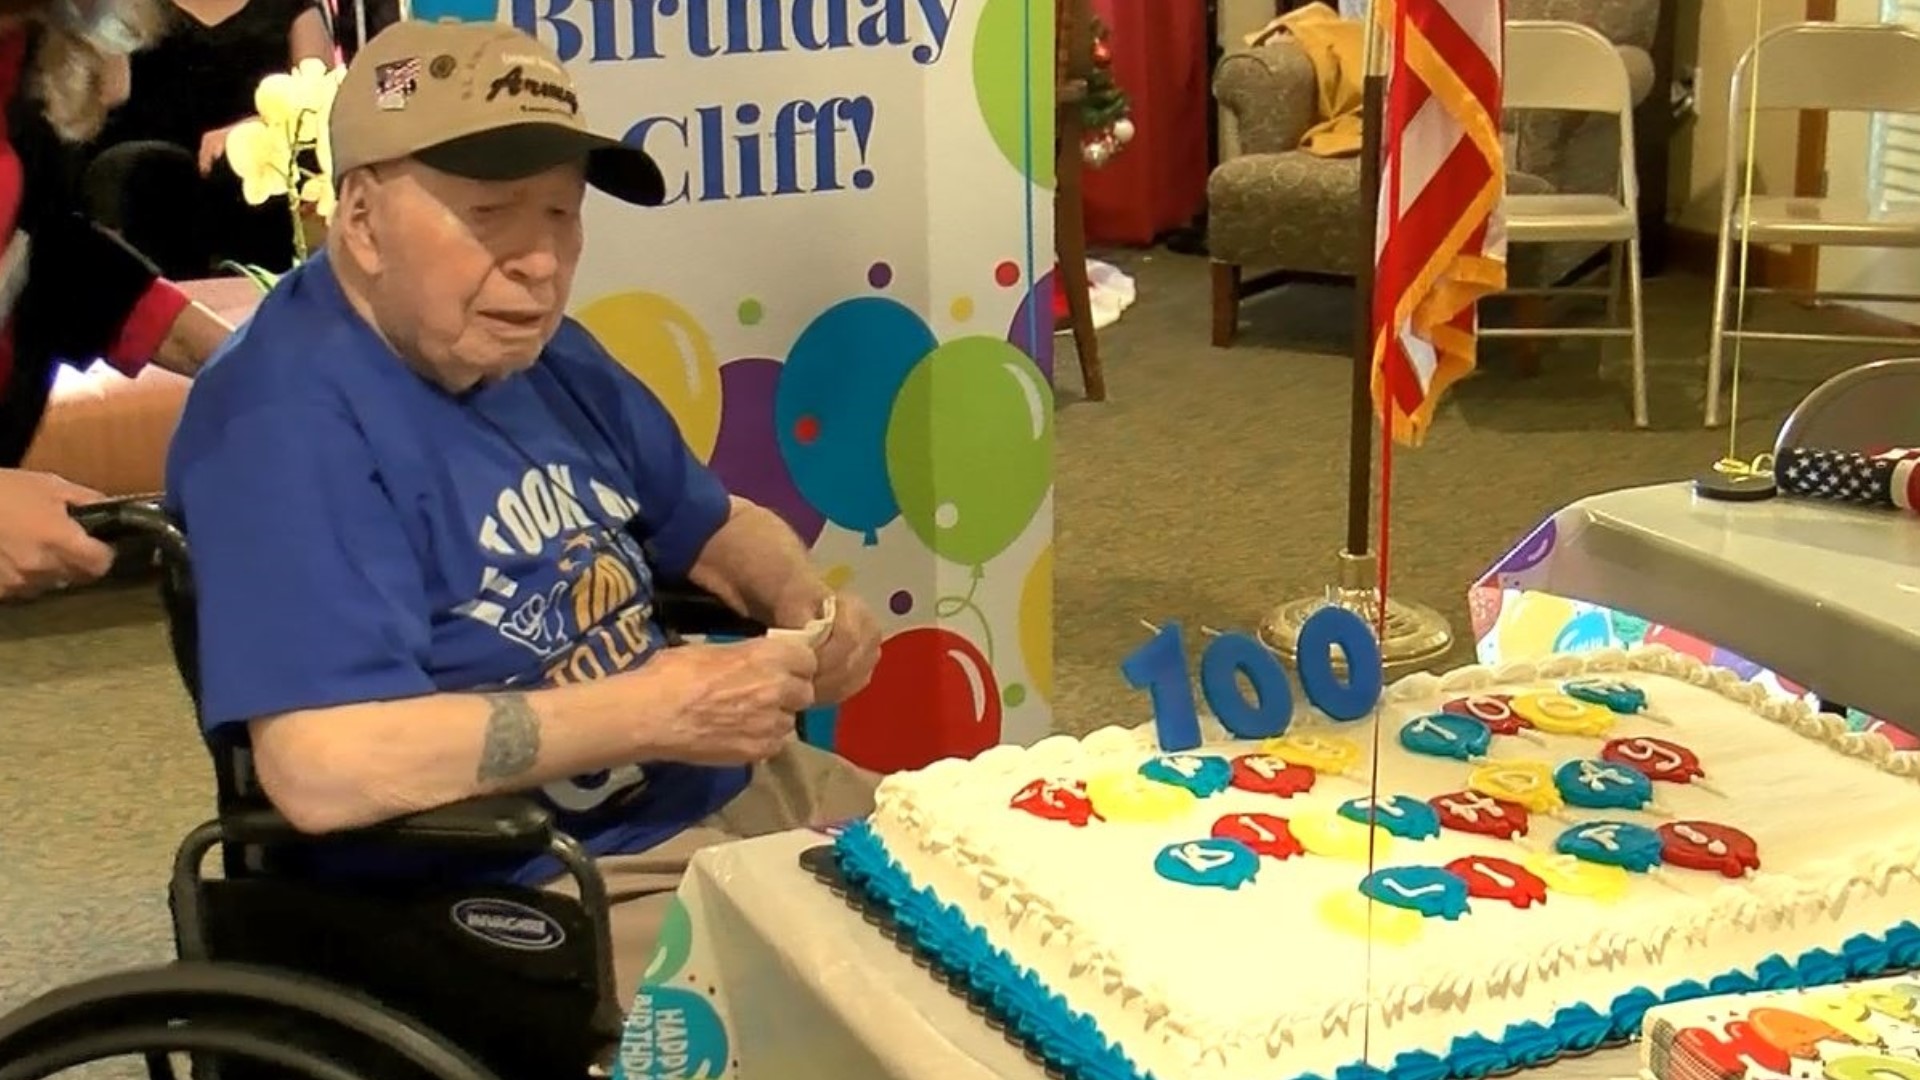 Cliff Bennett, a WWII veteran, celebrated his 100th birthday on Tuesday at Landings of Oregon surrounded by friends, family and an appreciation of his service.